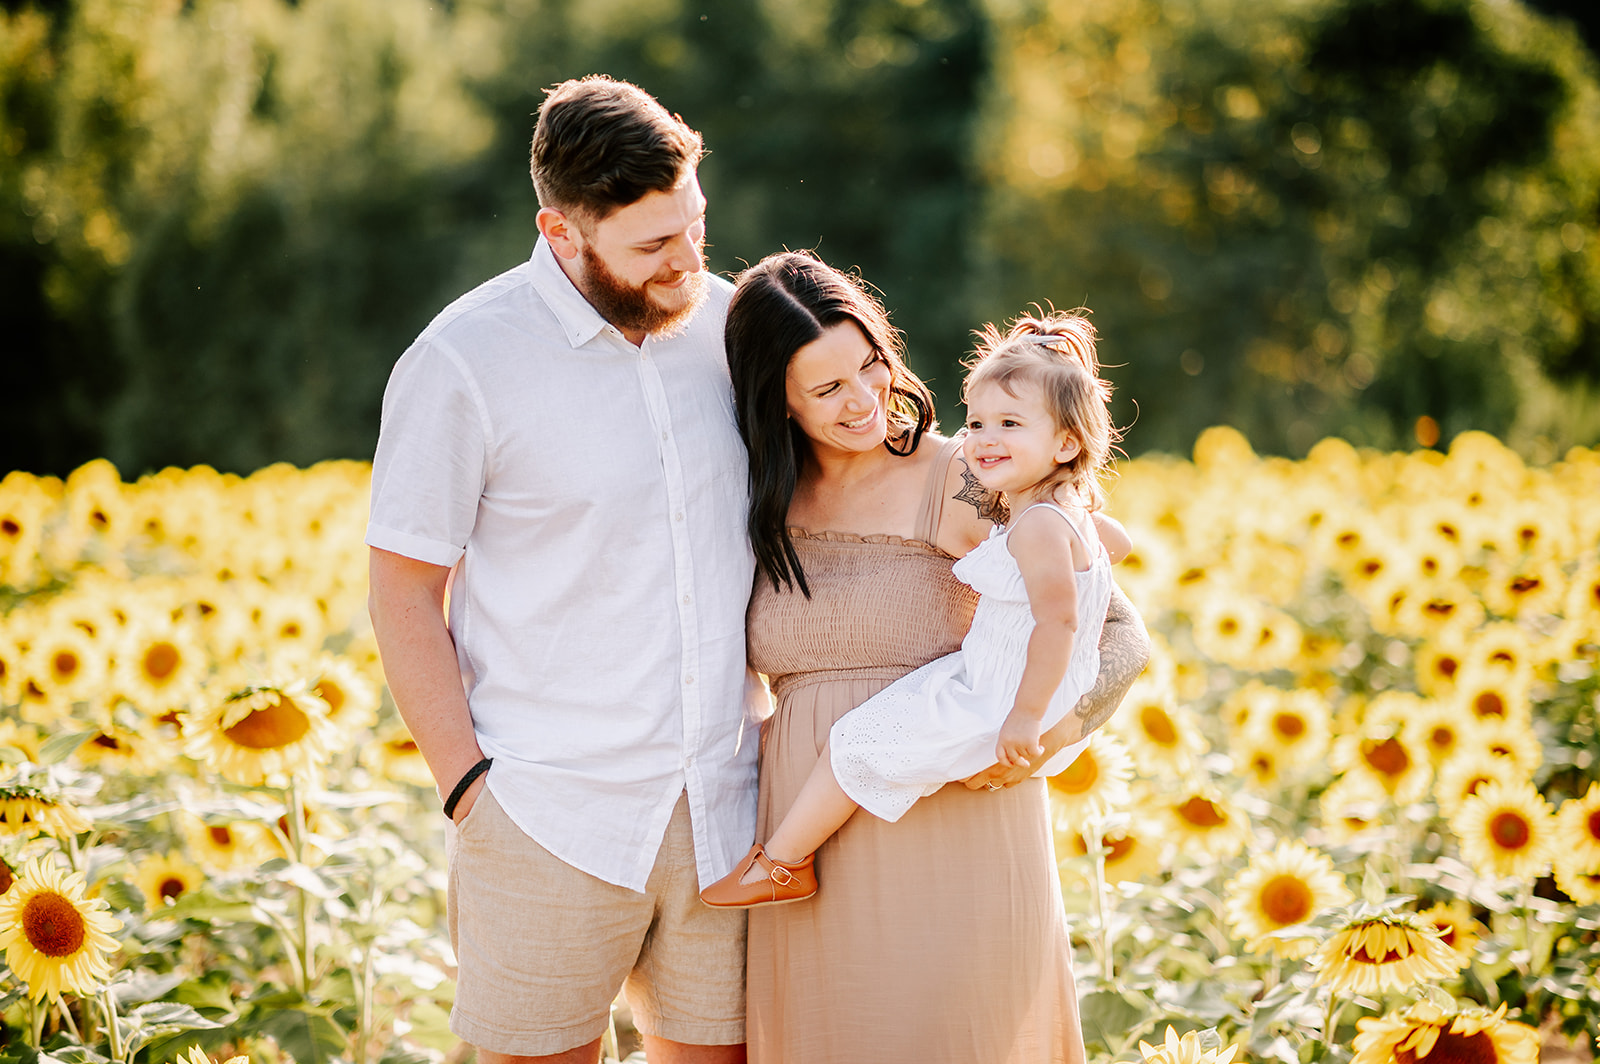 A mom and dad smile down at their smiling daughter while standing in a field of sunflowers